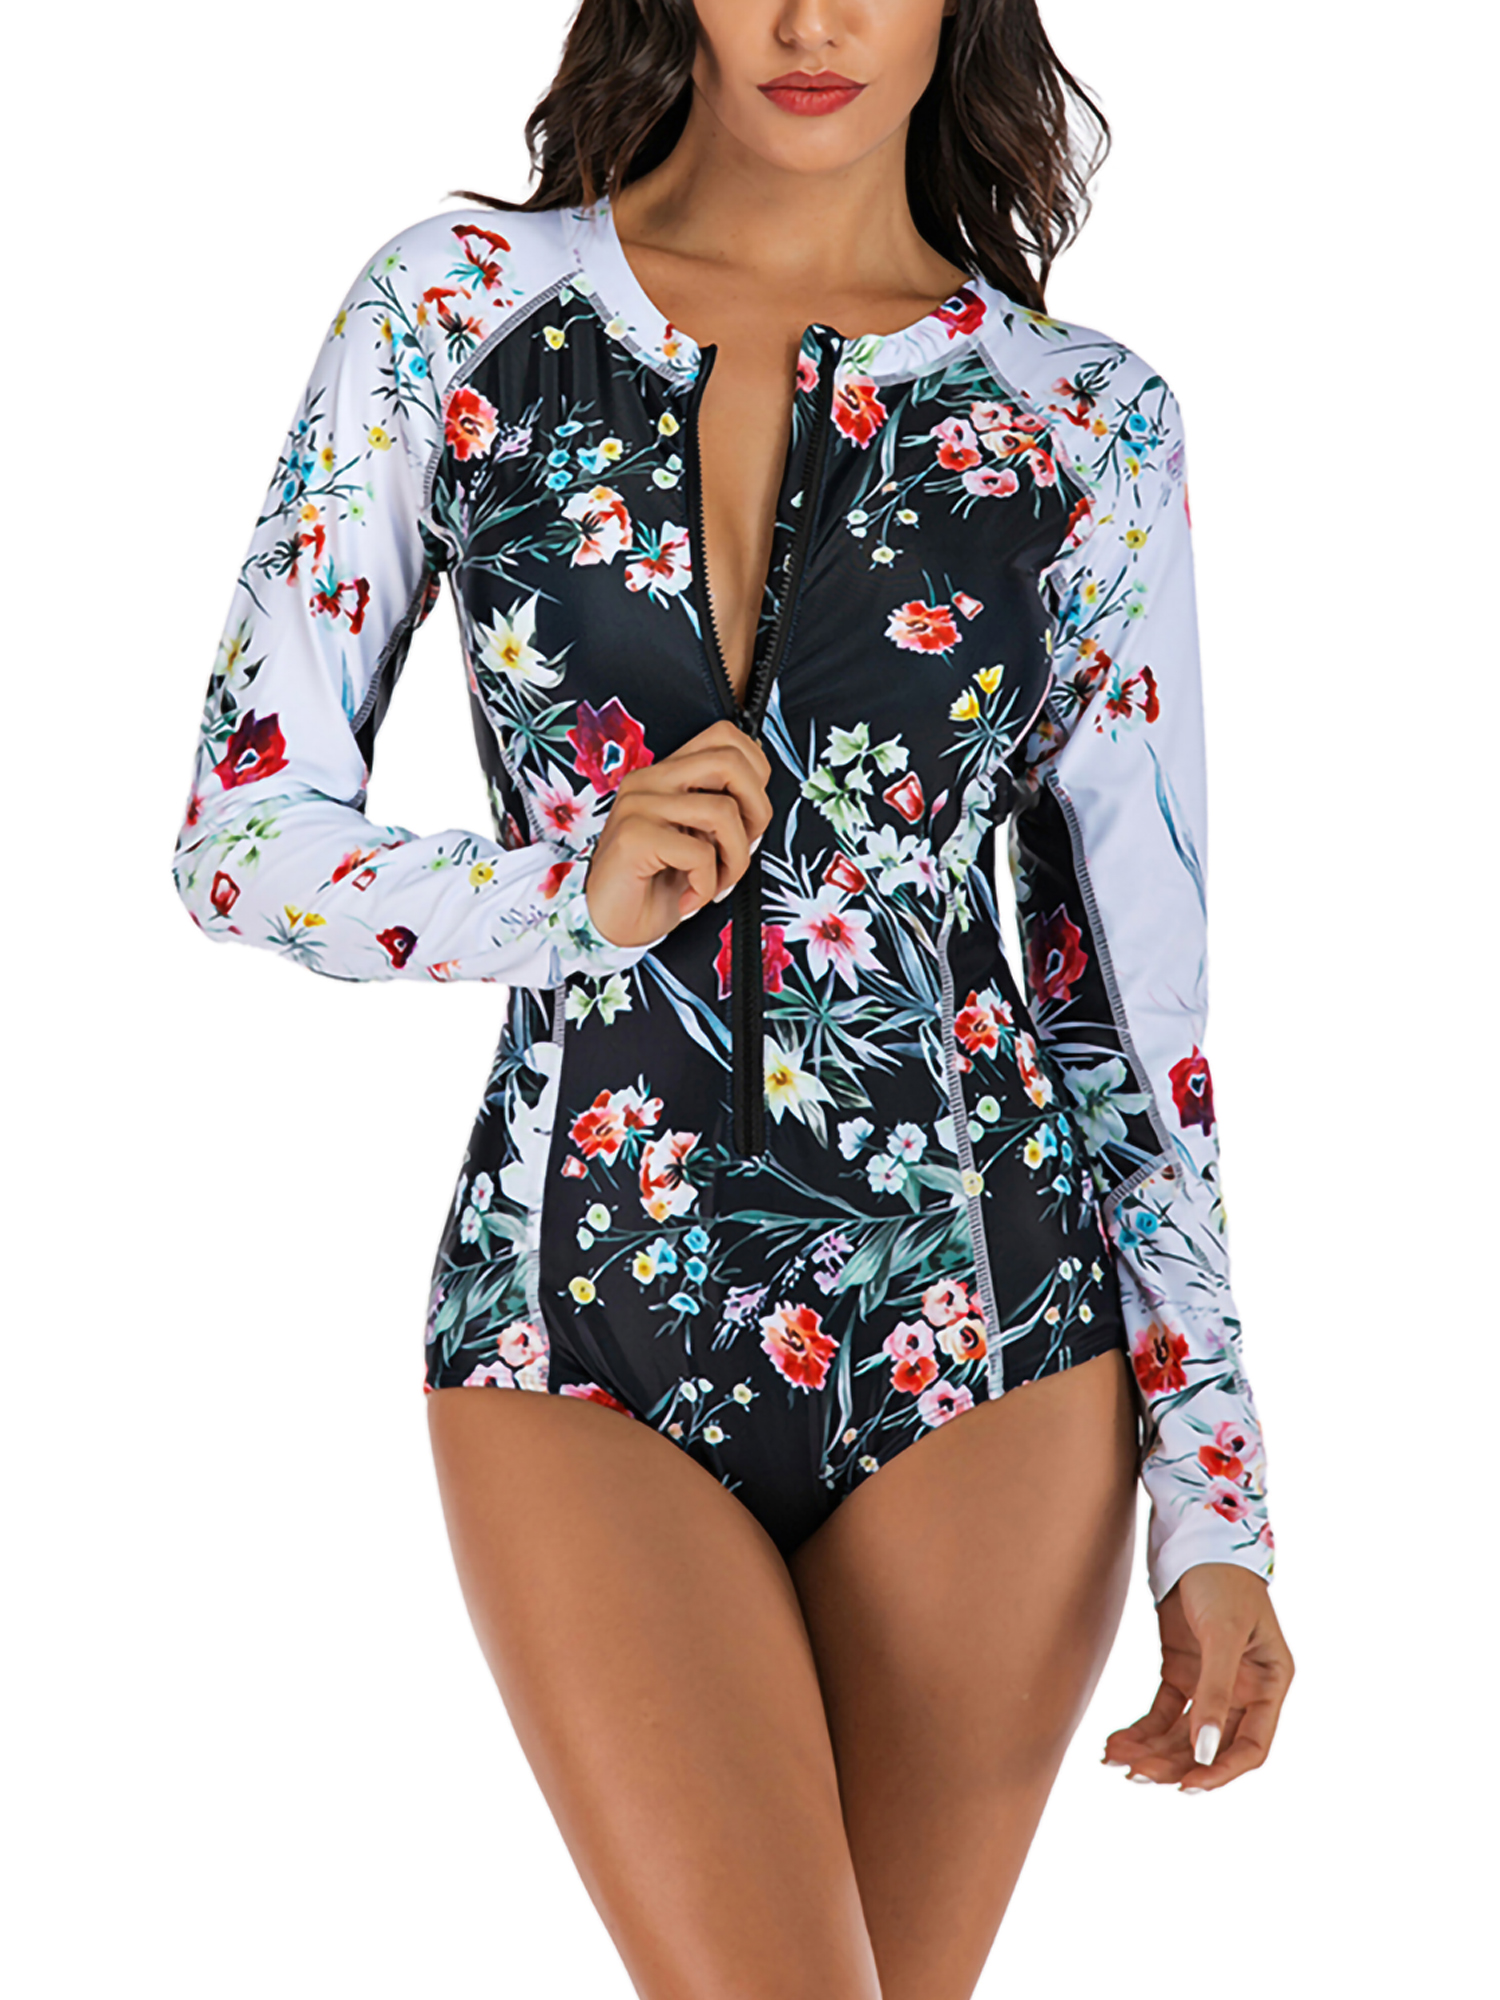 Long Sleeve One-piece Swimsuits for Women Surfing Diving Suit Bathing Suits Sexy Ladies S-2XL Floral Tummy Control - image 3 of 8